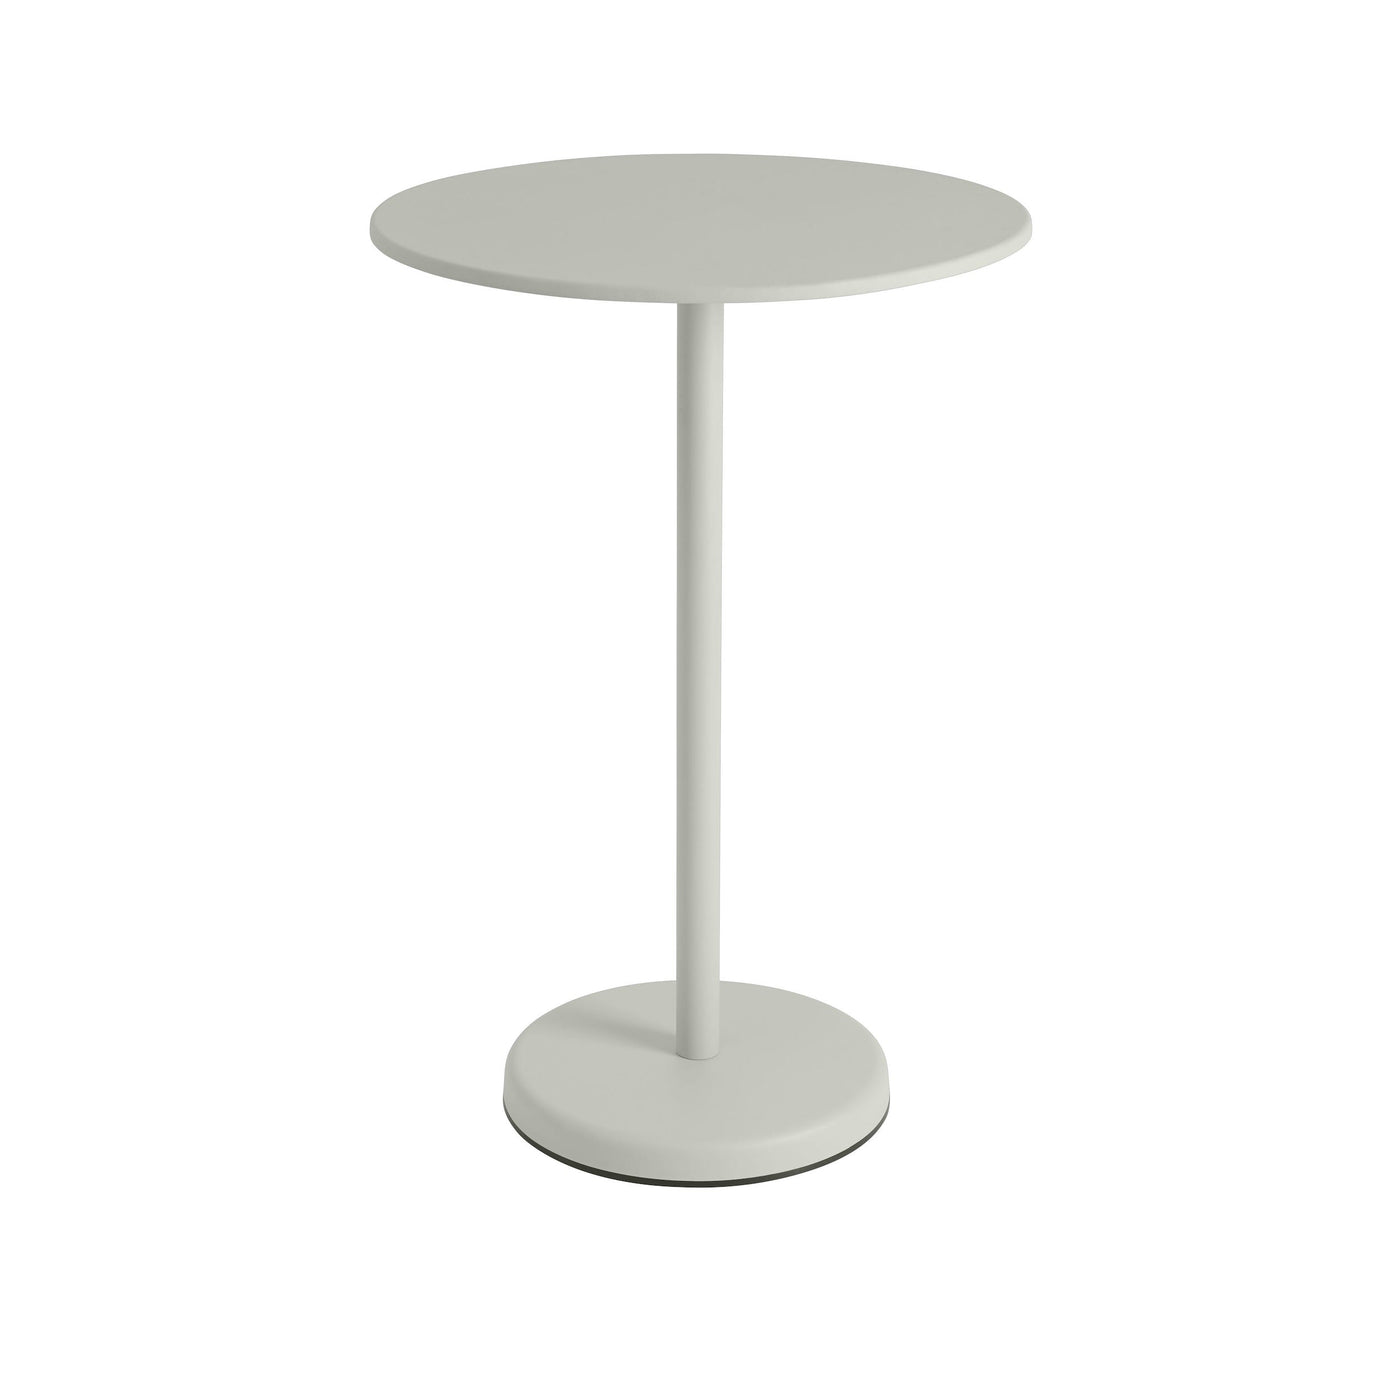 Muuto Linear Steel Cafe Table 105cm height. Shop outdoor furniture at at someday designs. #colour_grey